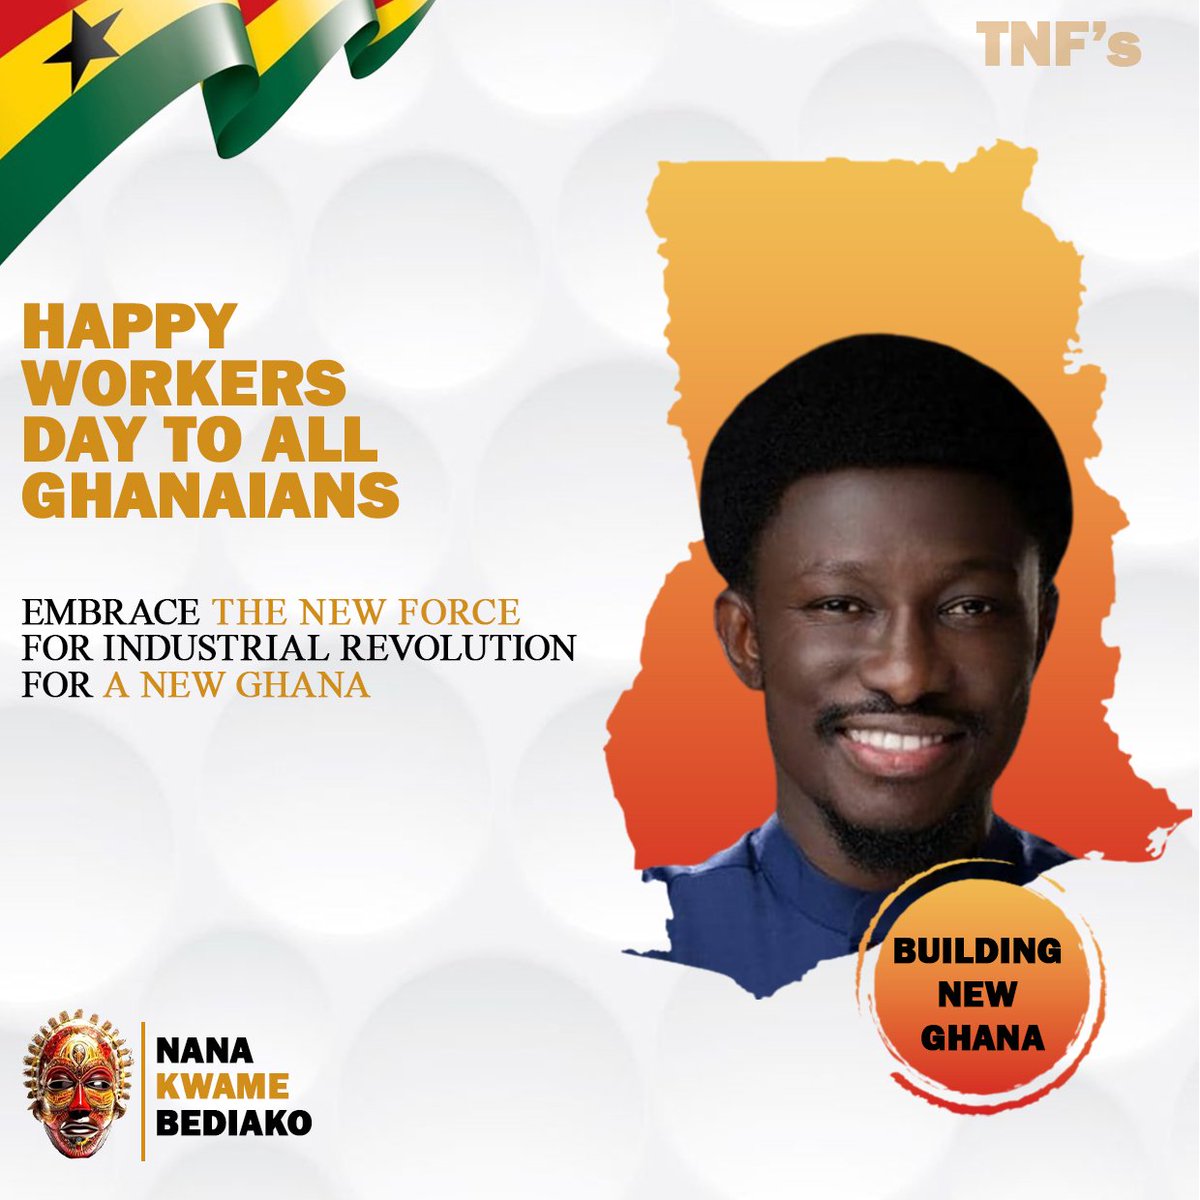 Happy workers day to all Ghanaians.
Embrace The New Force ,
For Industrial Revolution
For A New Ghana 🇬🇭🇬🇭 

#NKBForPresident